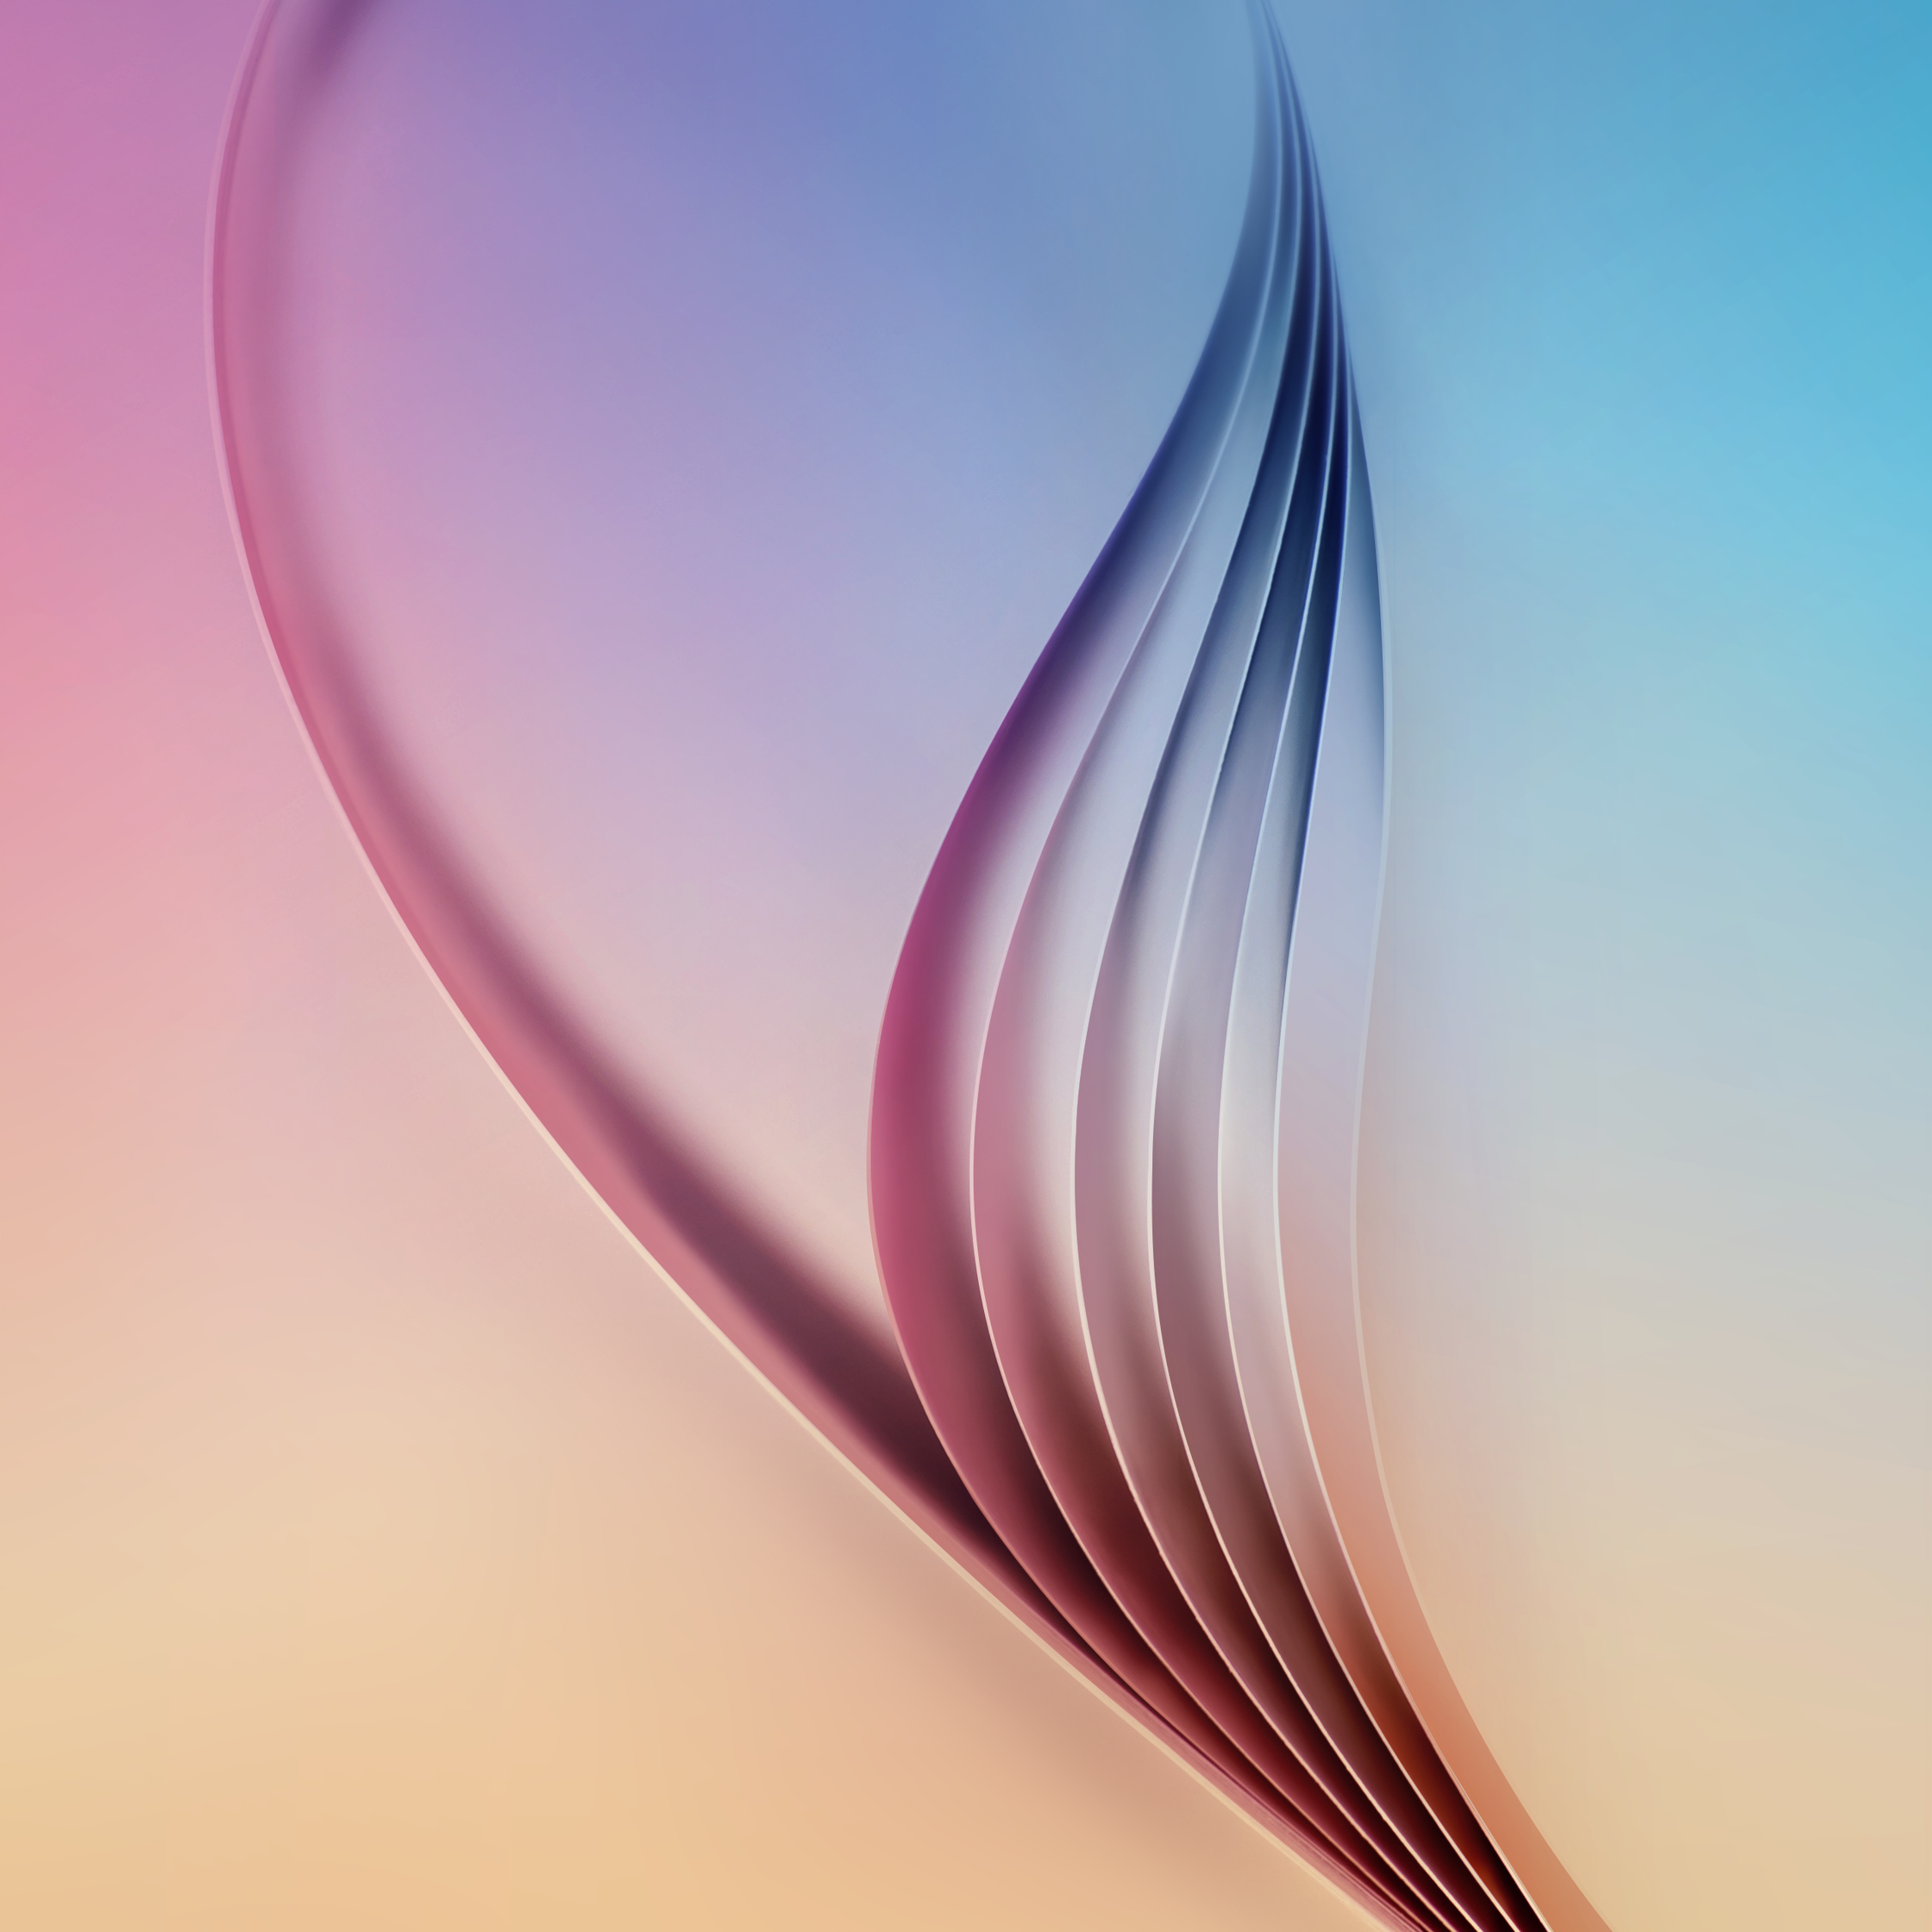 A gift from SamMobile: Galaxy S6 and Galaxy S6 Edge default wallpaper!